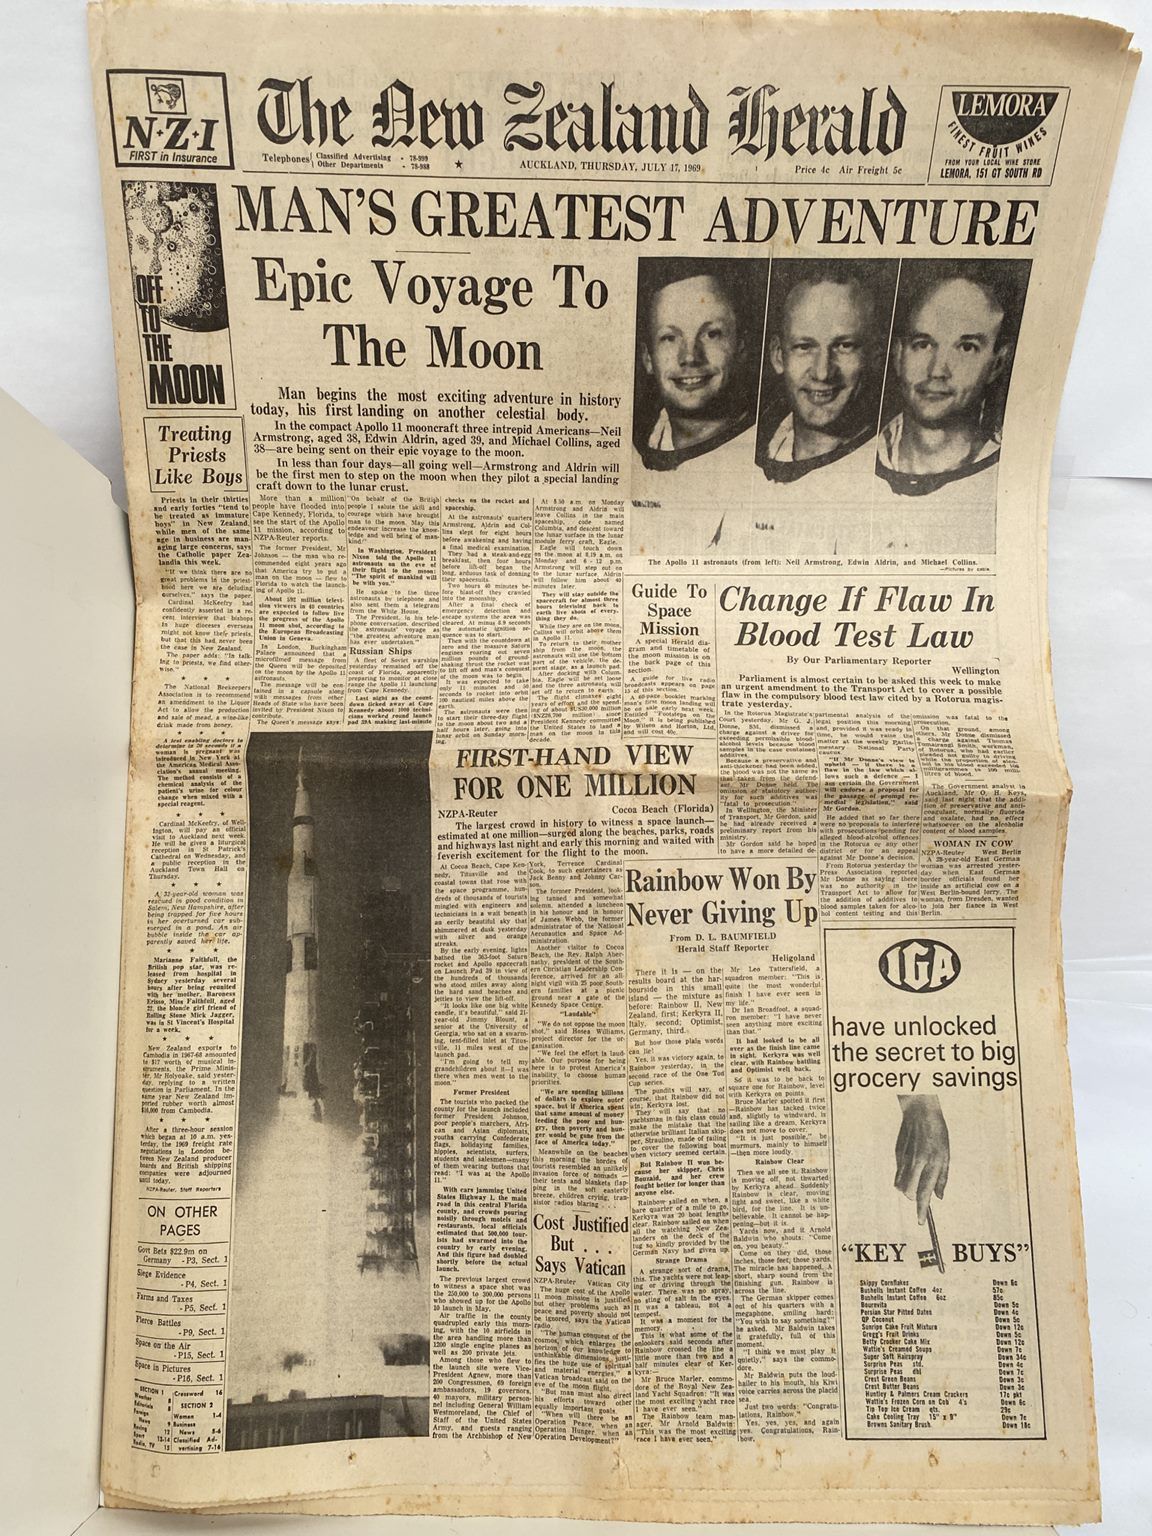 OLD NEWSPAPER: The New Zealand Herald, 17 July 1969 - Moon Landing Special